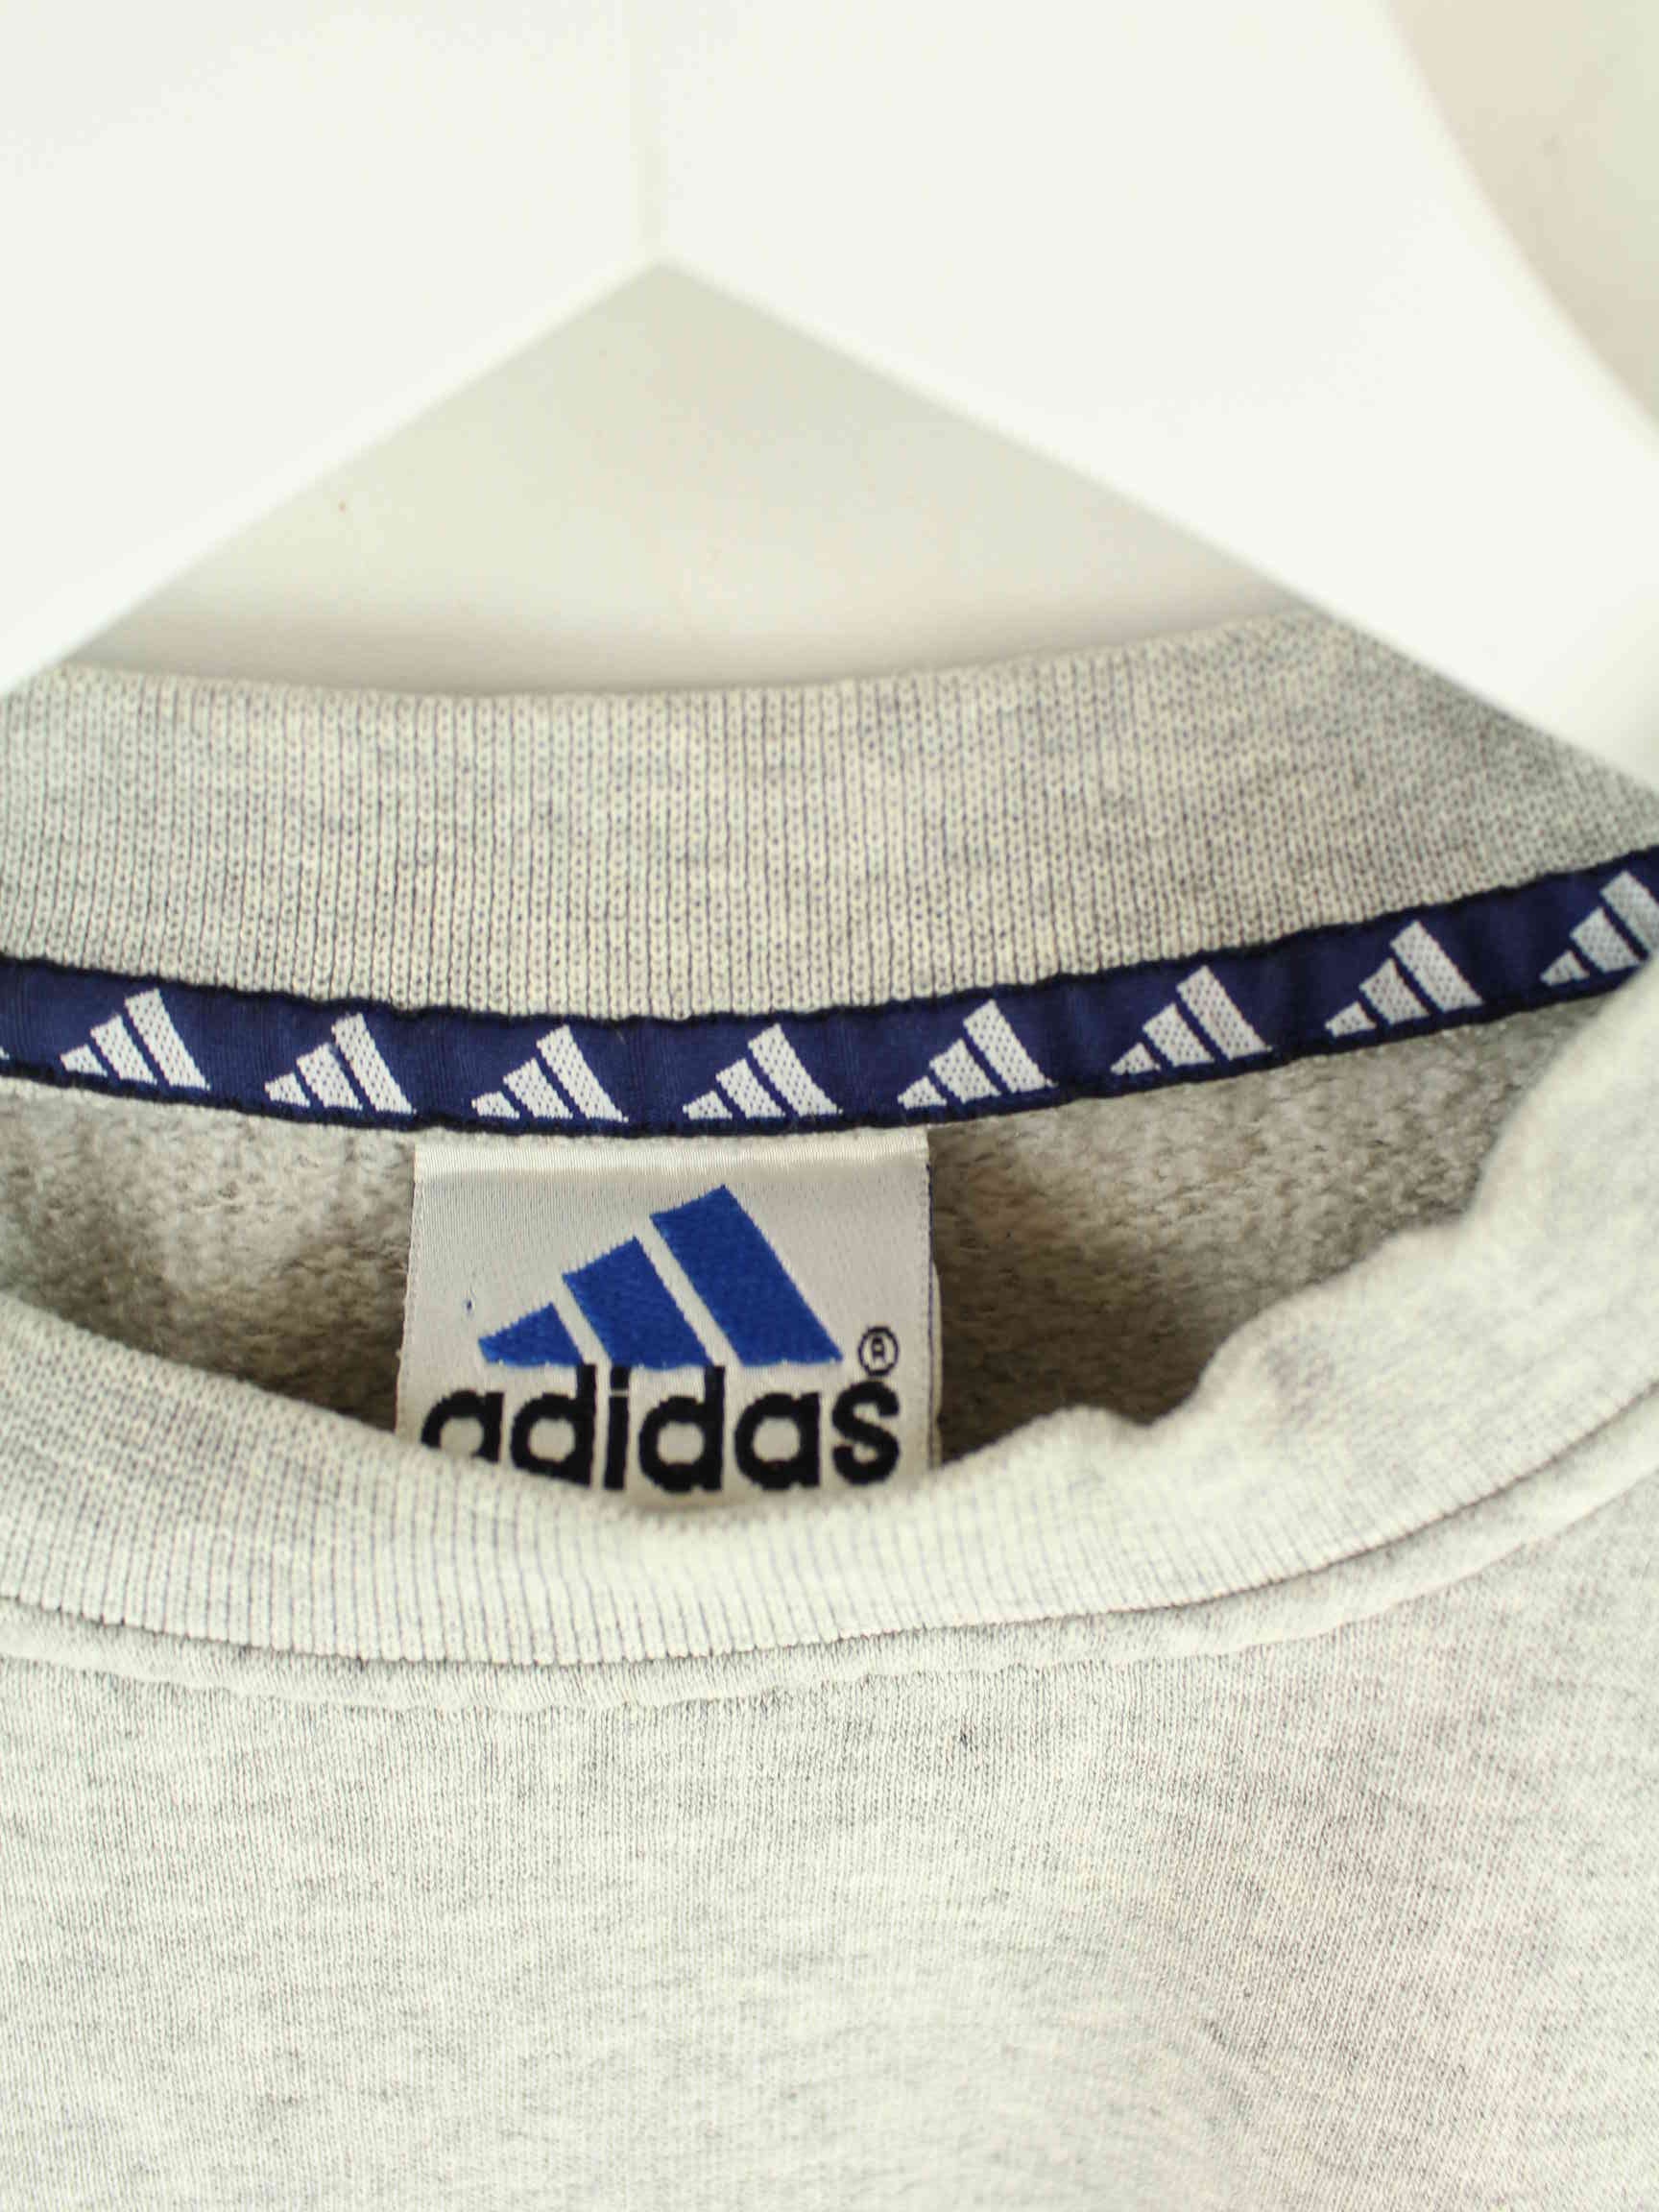 Adidas 90s Vintage Embroidered Sweater Grau S (detail image 2)